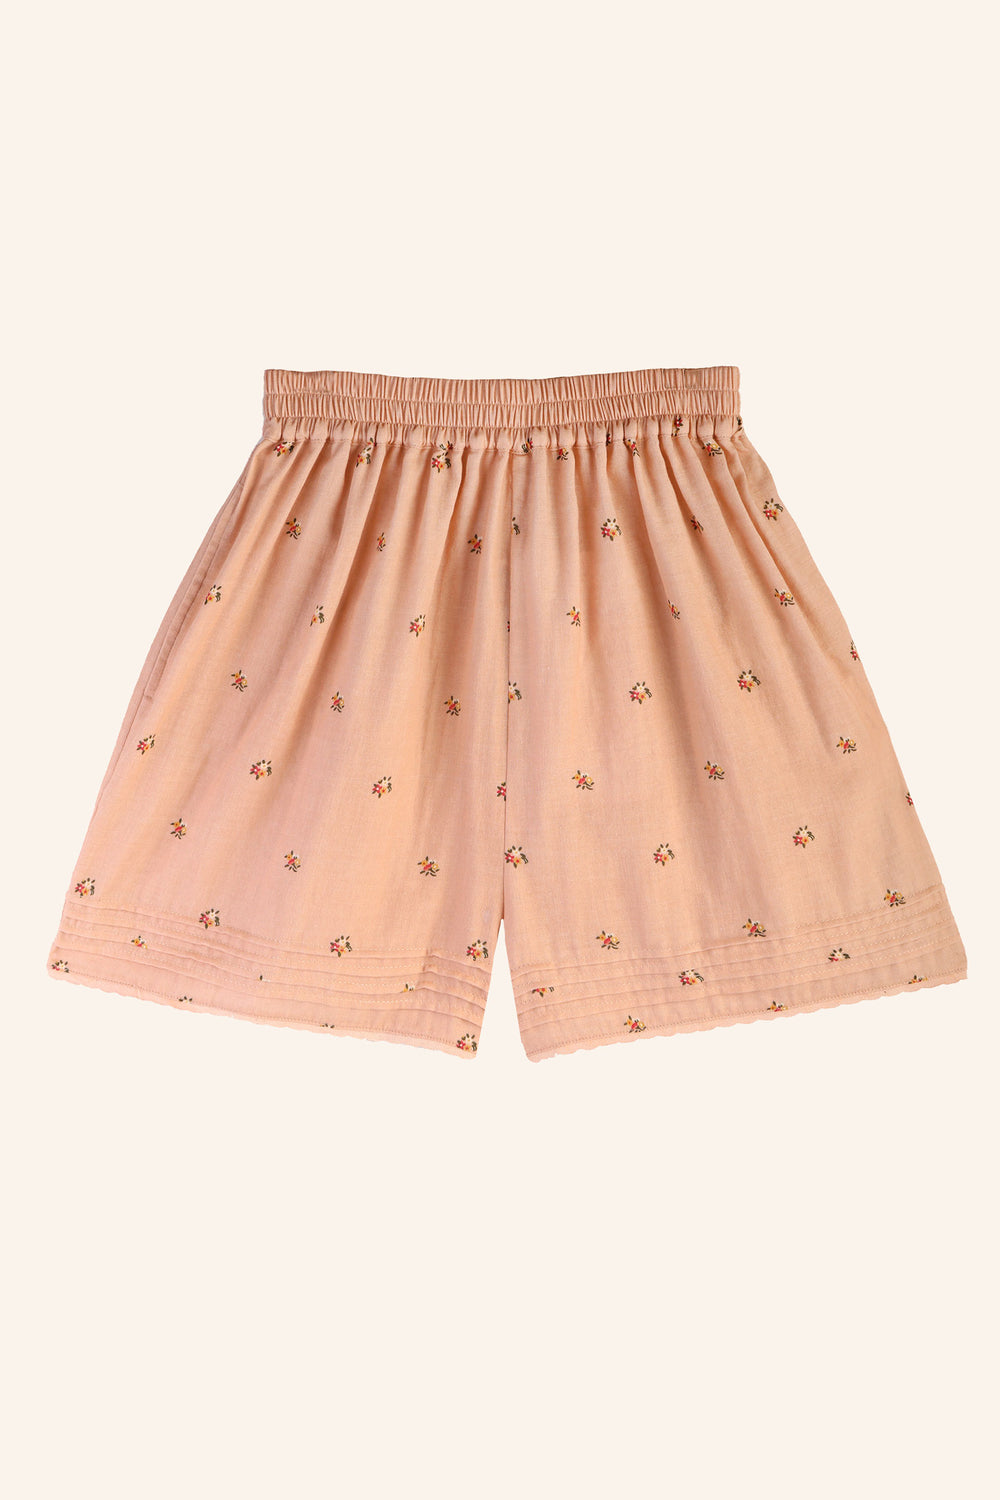 Caspia Shorts Pink Floral